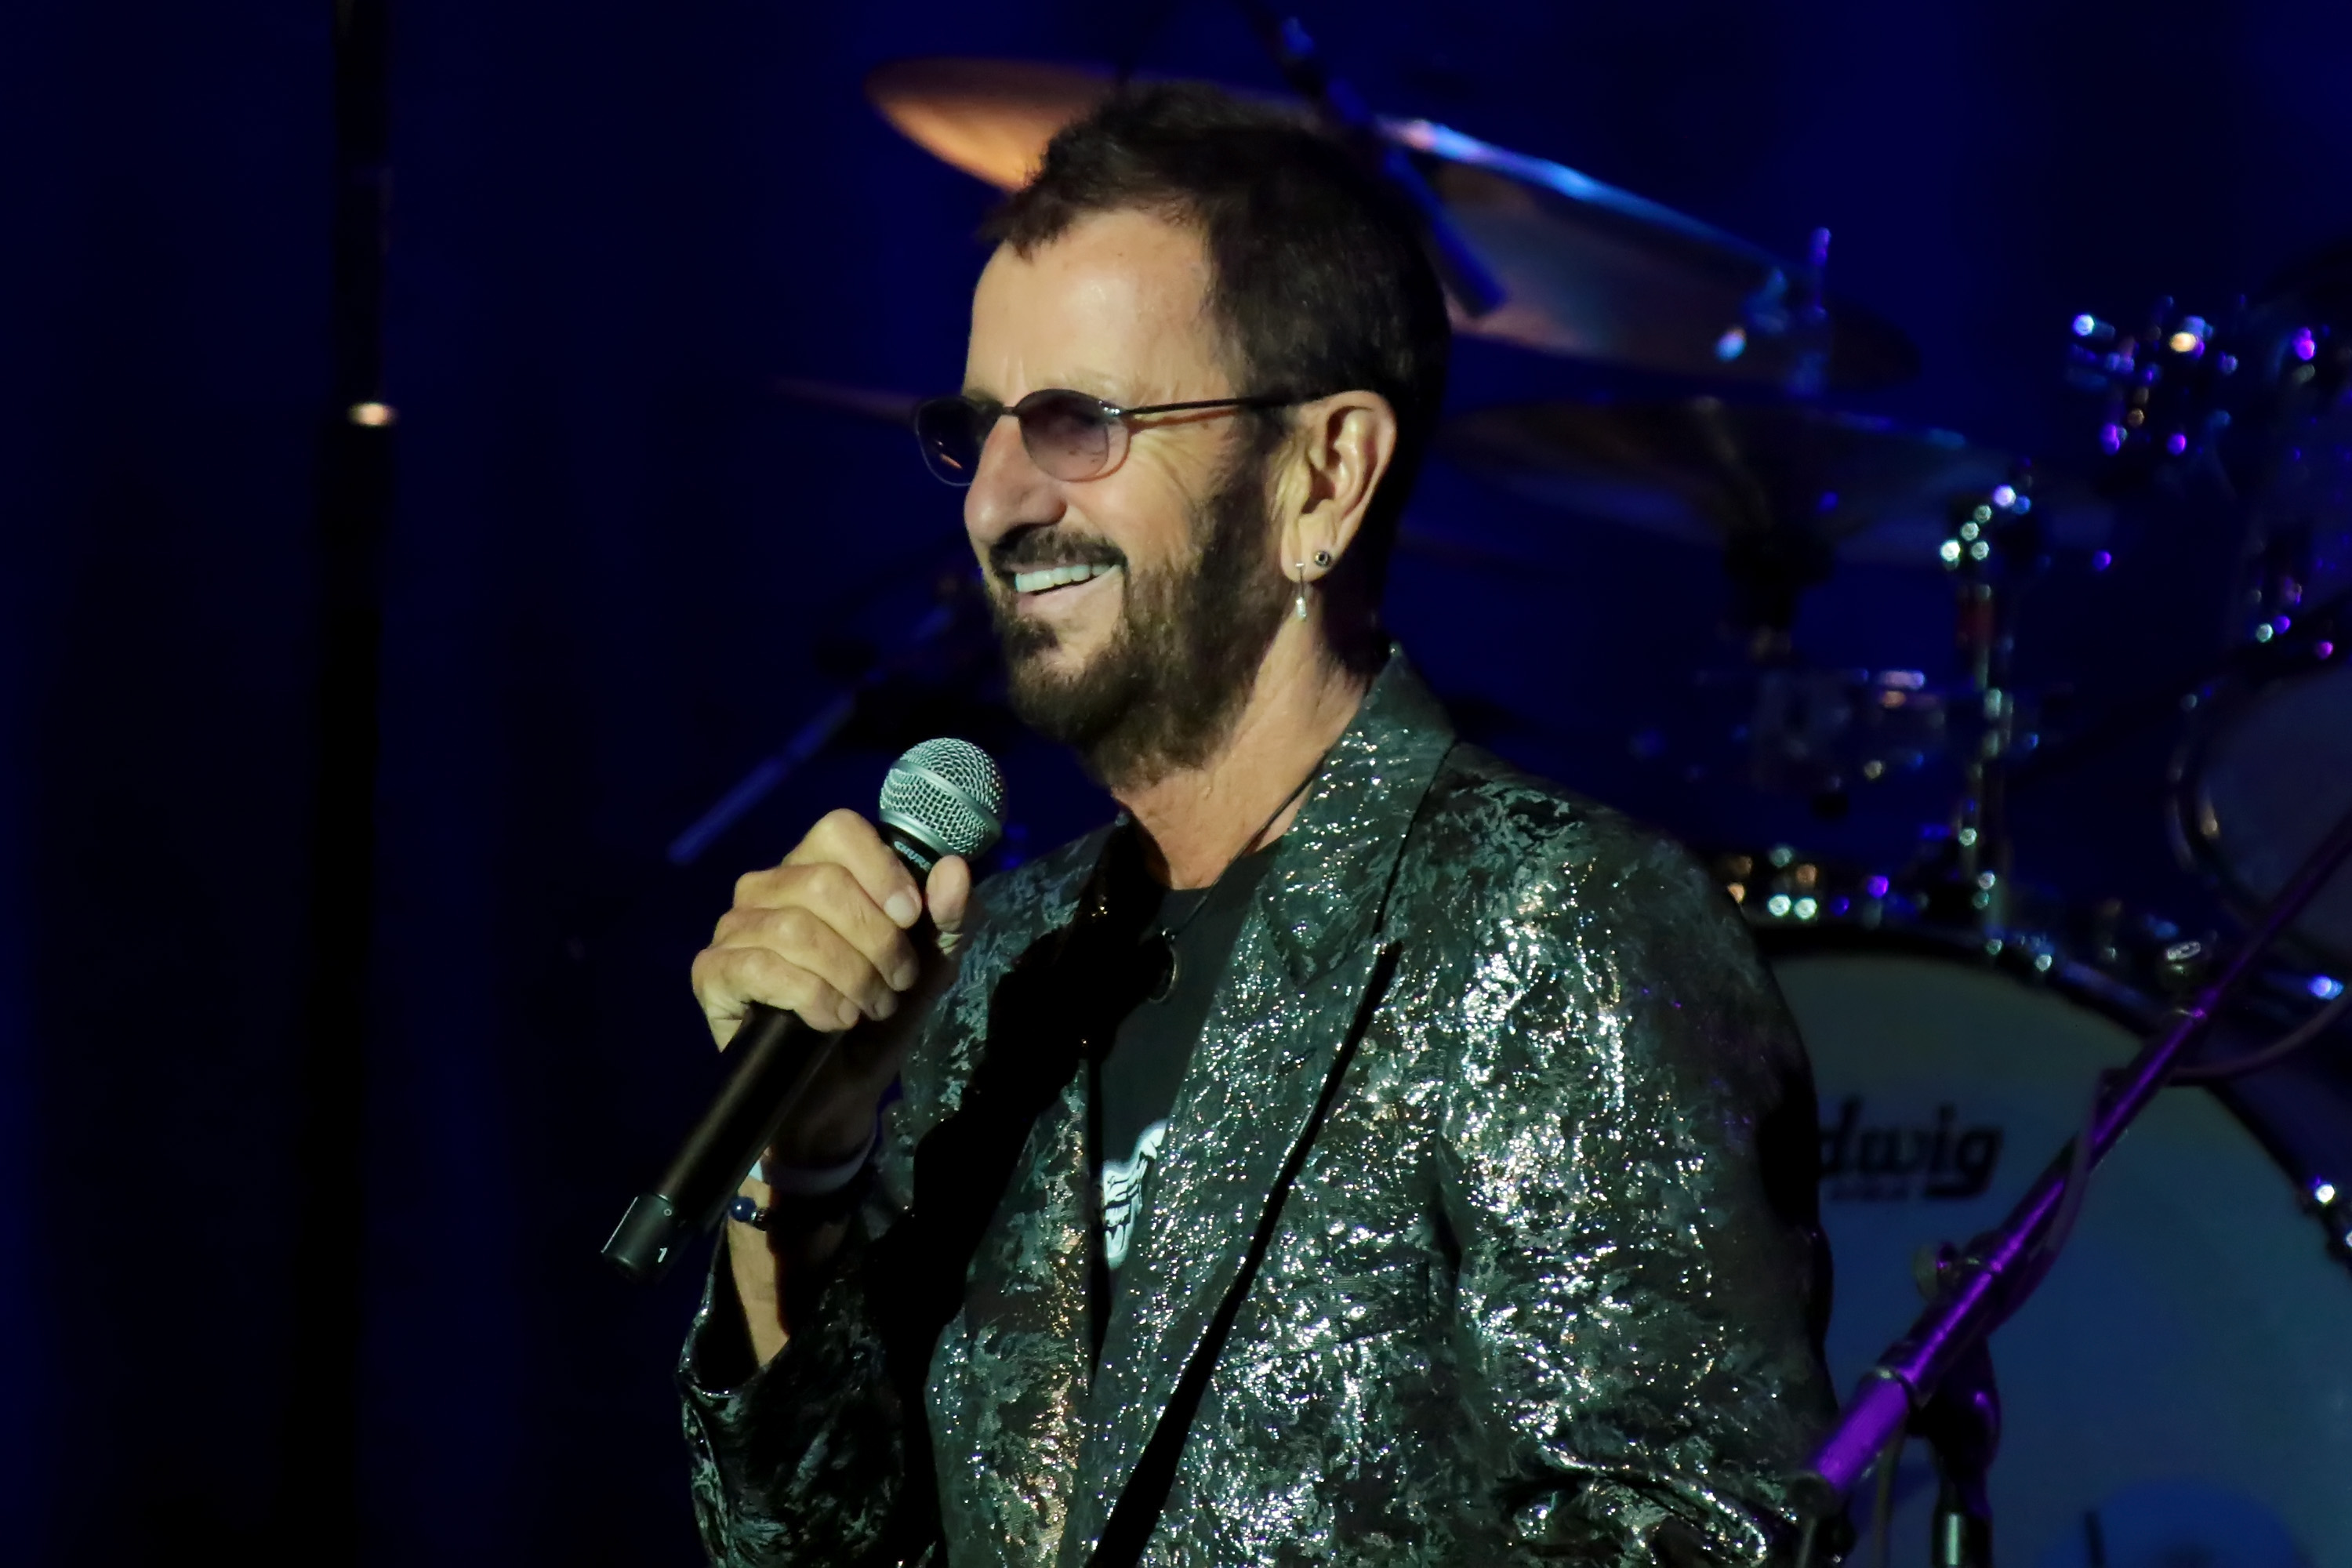 Ringo Starr performs with his All-Starr Band in Atlantic City, New Jersey